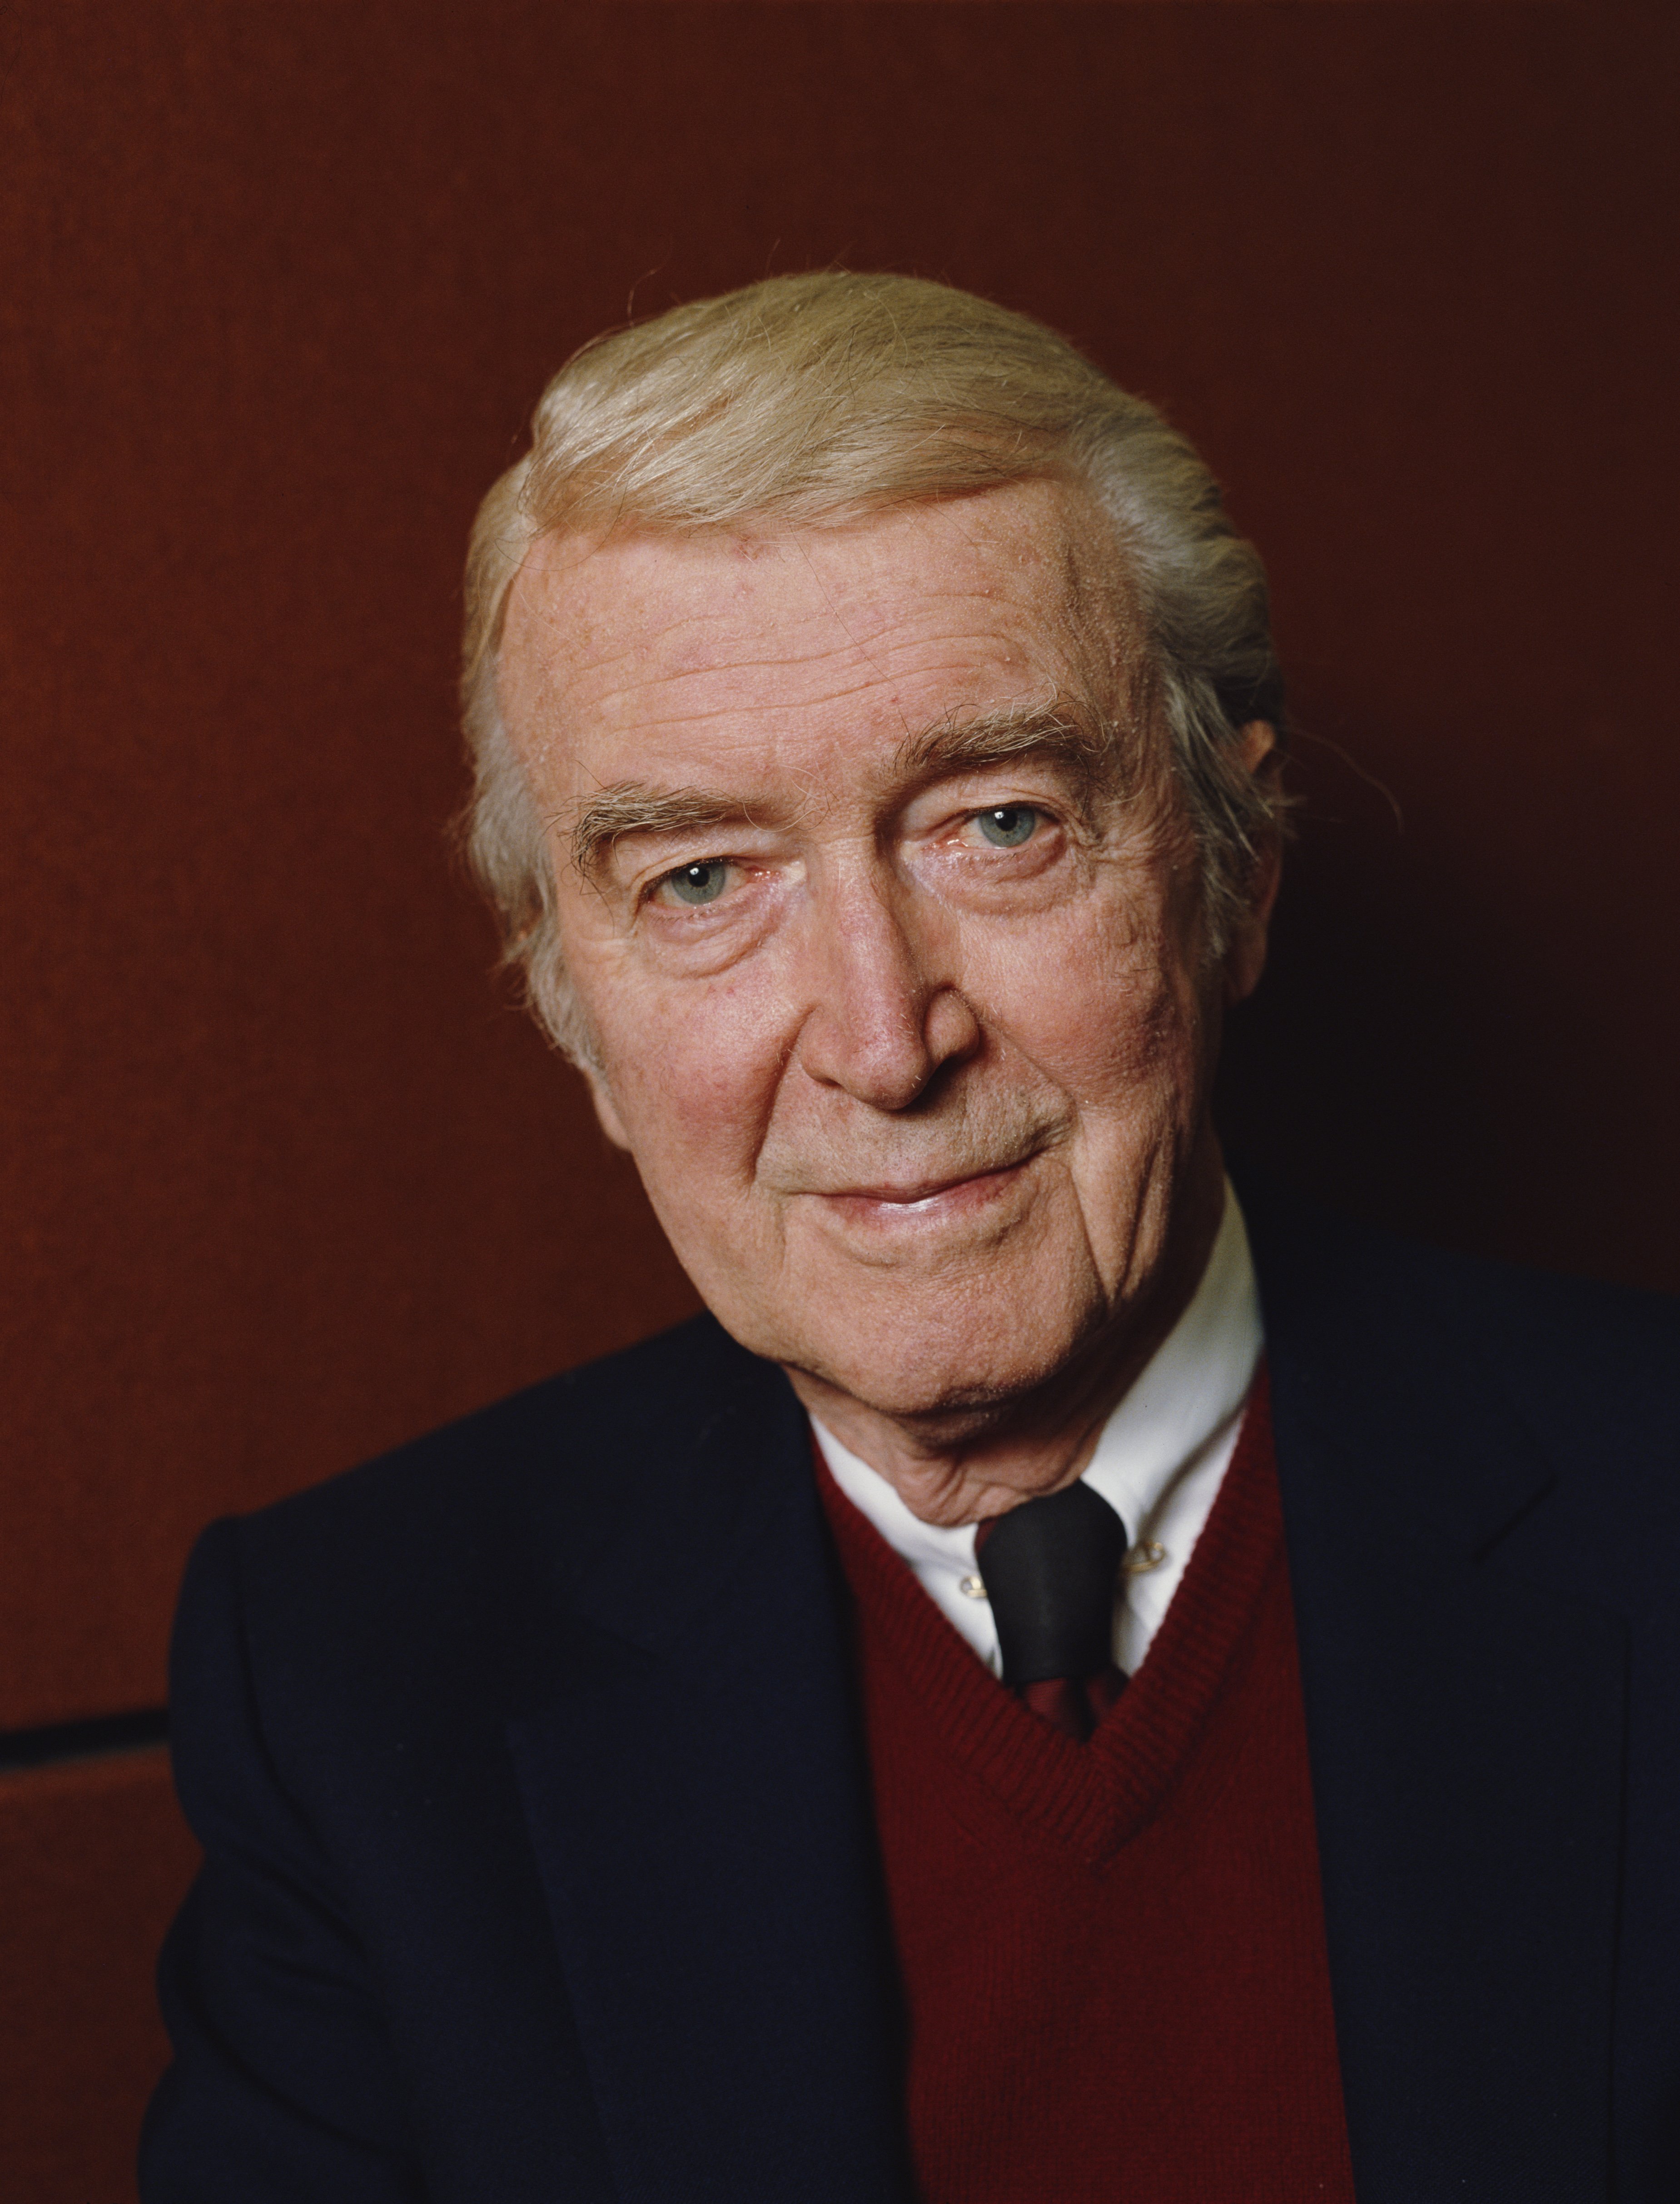 James Stewart posing for a photo, circa 1990. | Source: Getty Images